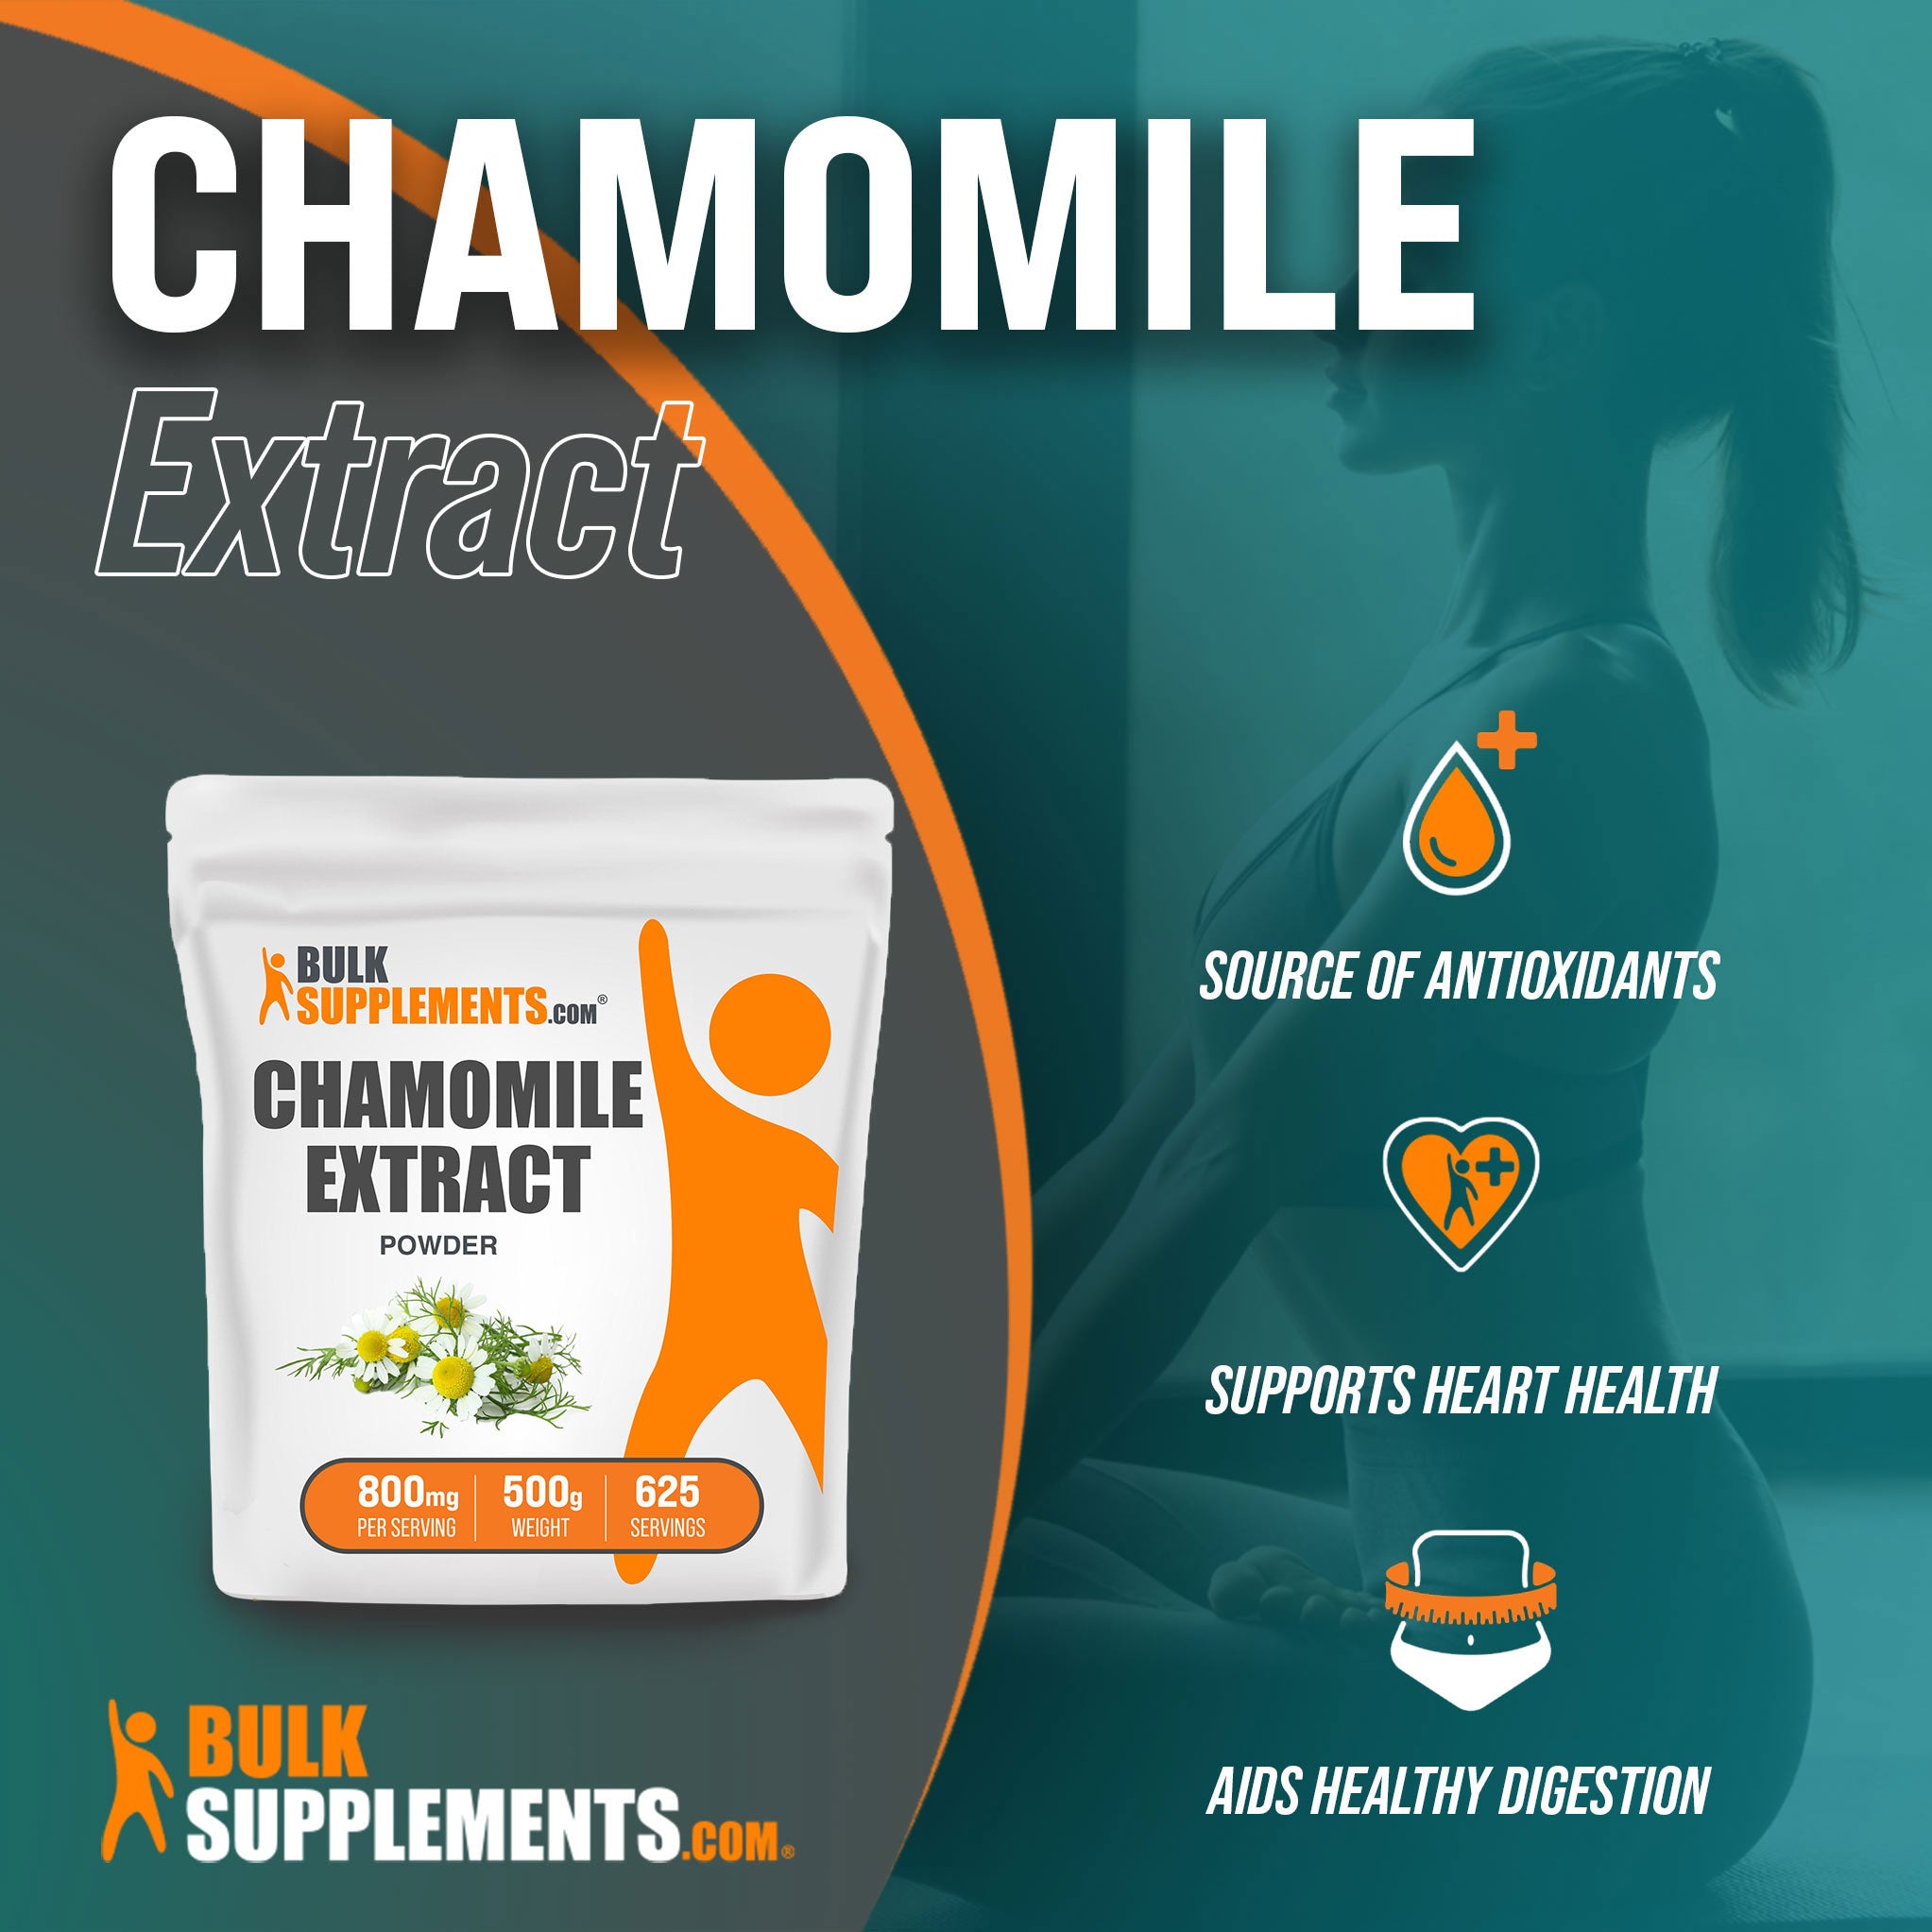 Benefits of our 500g Chamomile Extract herbal supplements; source of antioxidants, supports heart health, aids healthy digestion